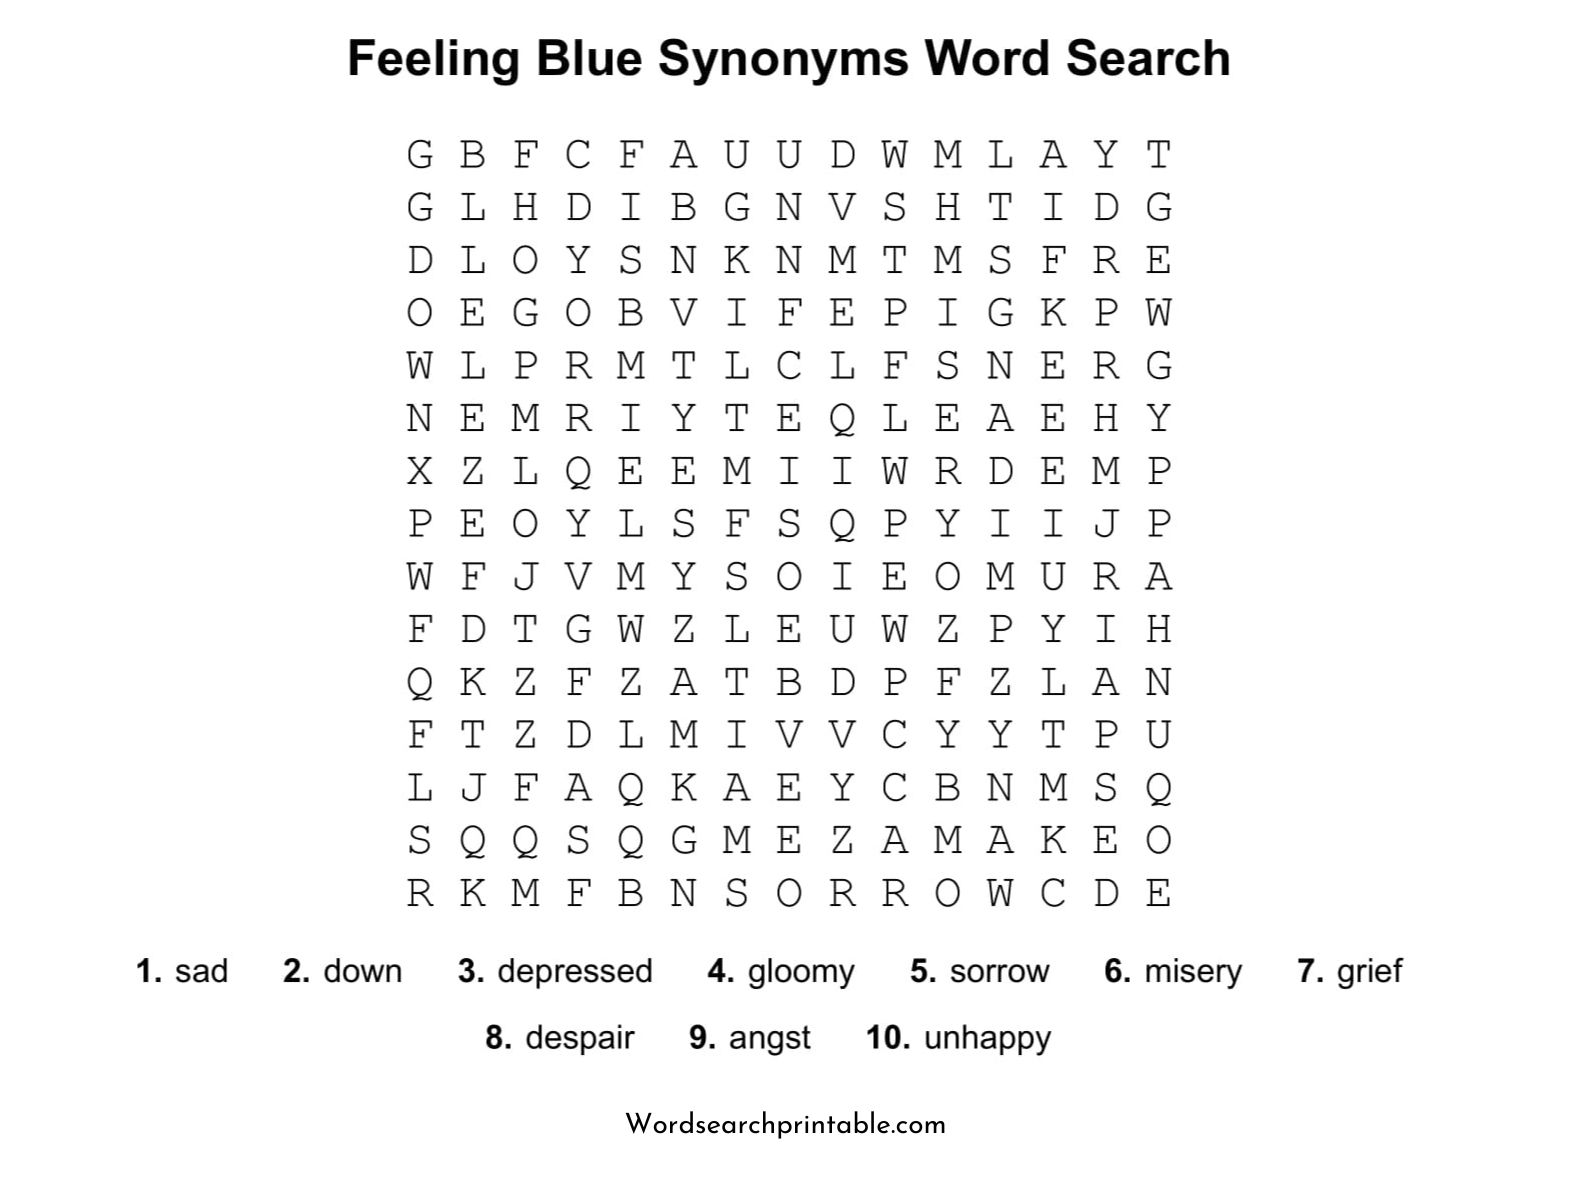 feeling blue synonyms word search puzzle